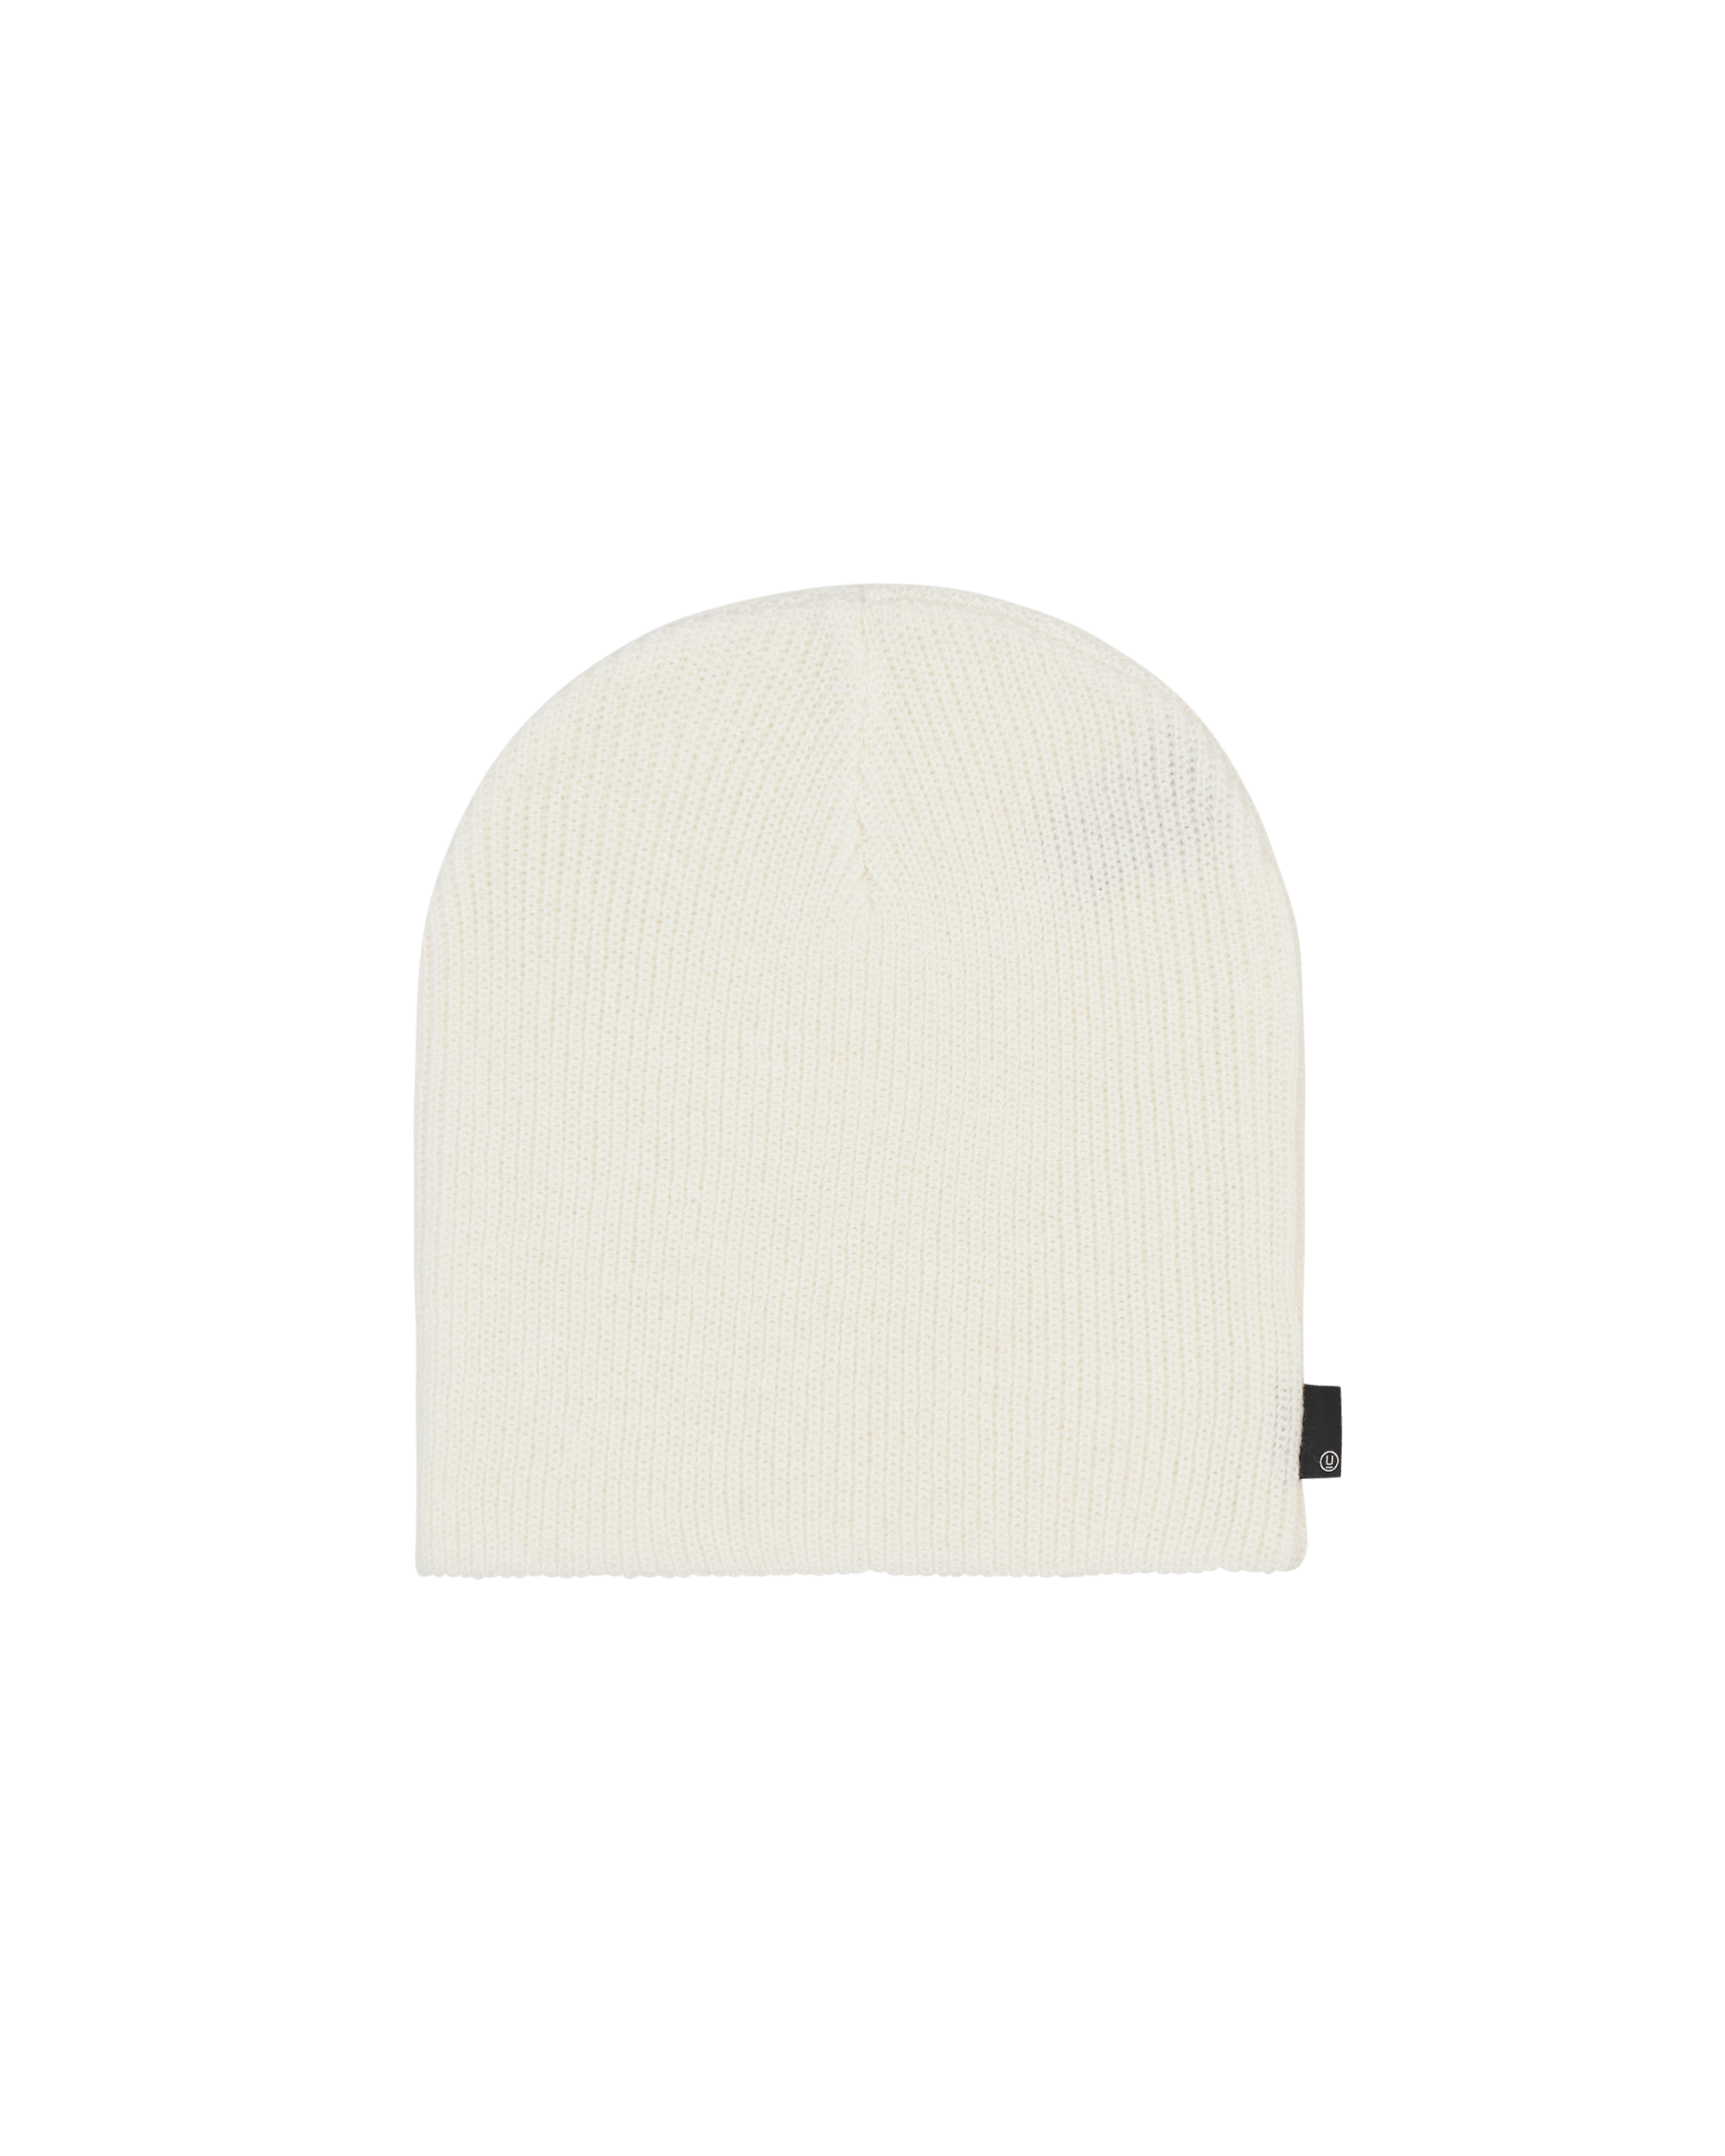 Undercover Beanie Off White Hats Beanies UC2A4H03 OFFWHITE